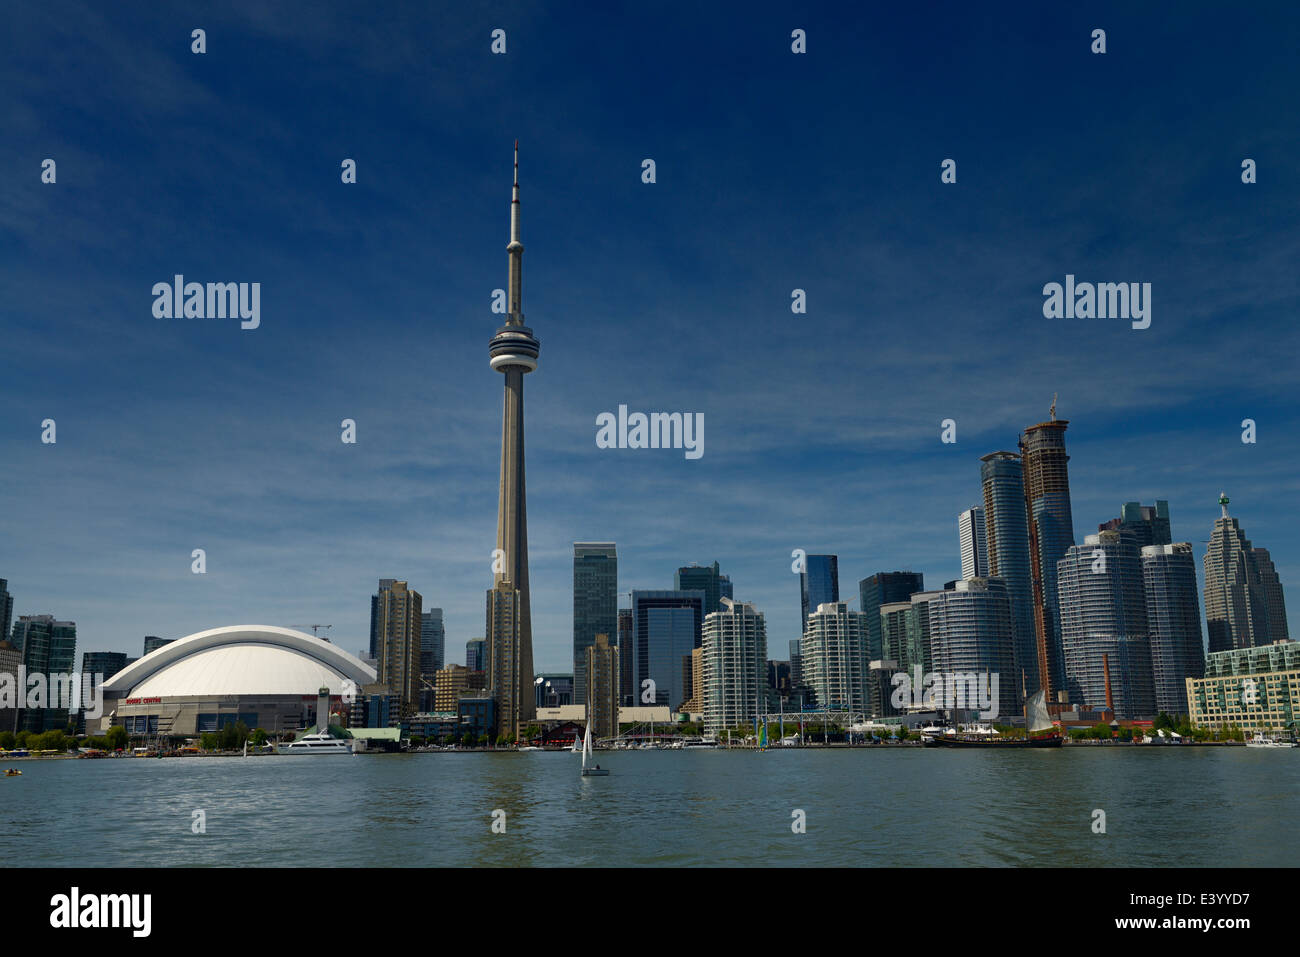 Toronto skyline with CN Tower, Rogers Centre, condo, and financial towers from Lake Ontario Toronto Island Stock Photo